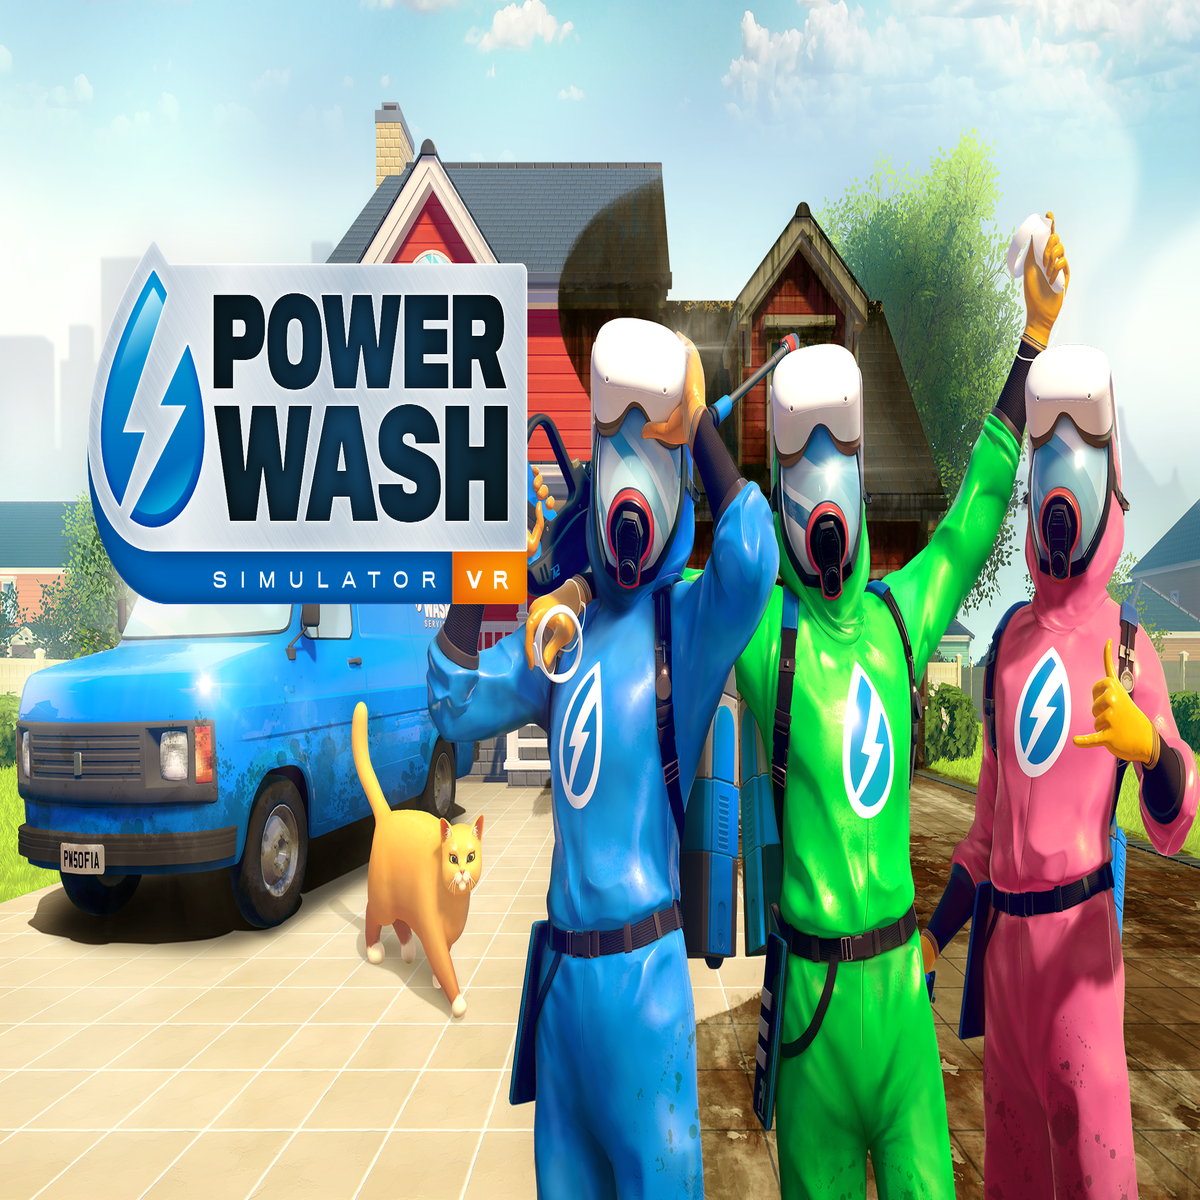 PowerWash Simulator VR review – the only way to power wash